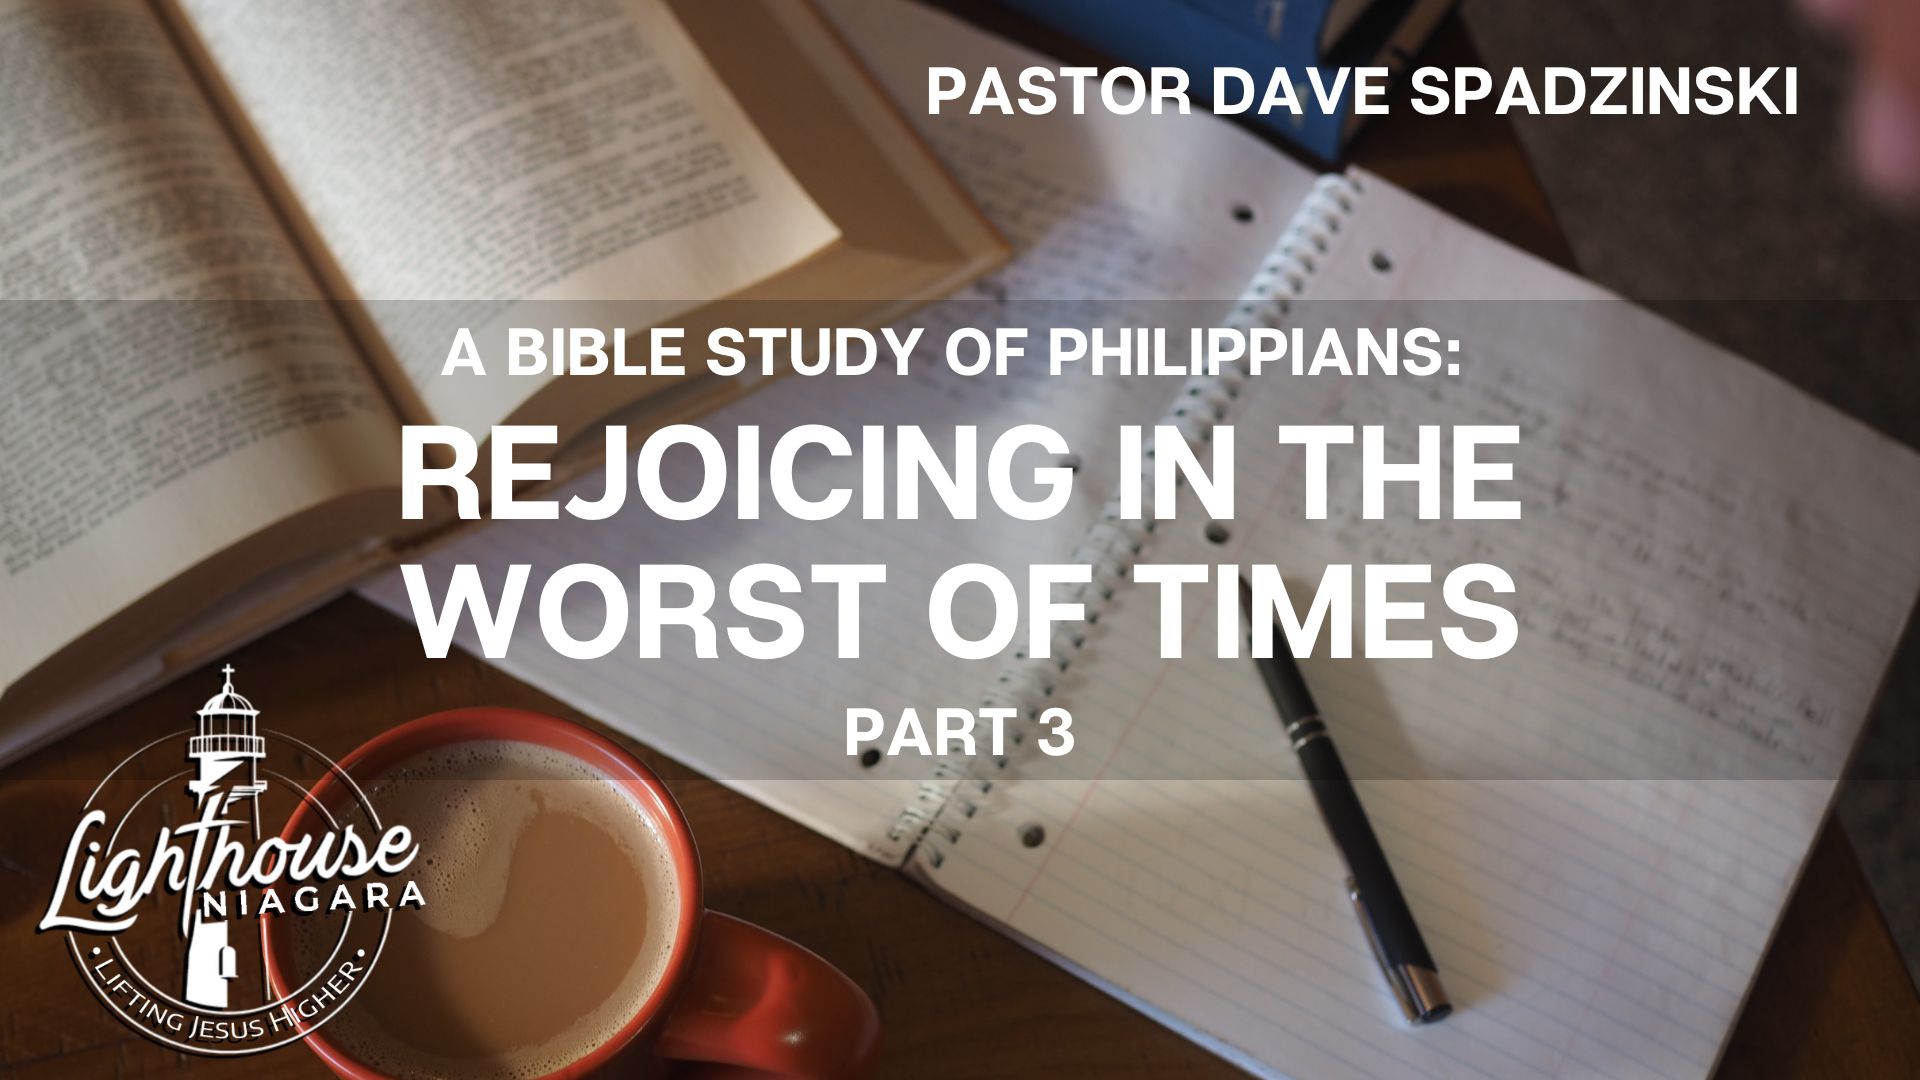 A Bible Study Of Philippians: Rejoicing In The Worst Of Times - Pastor Dave Spadzinski